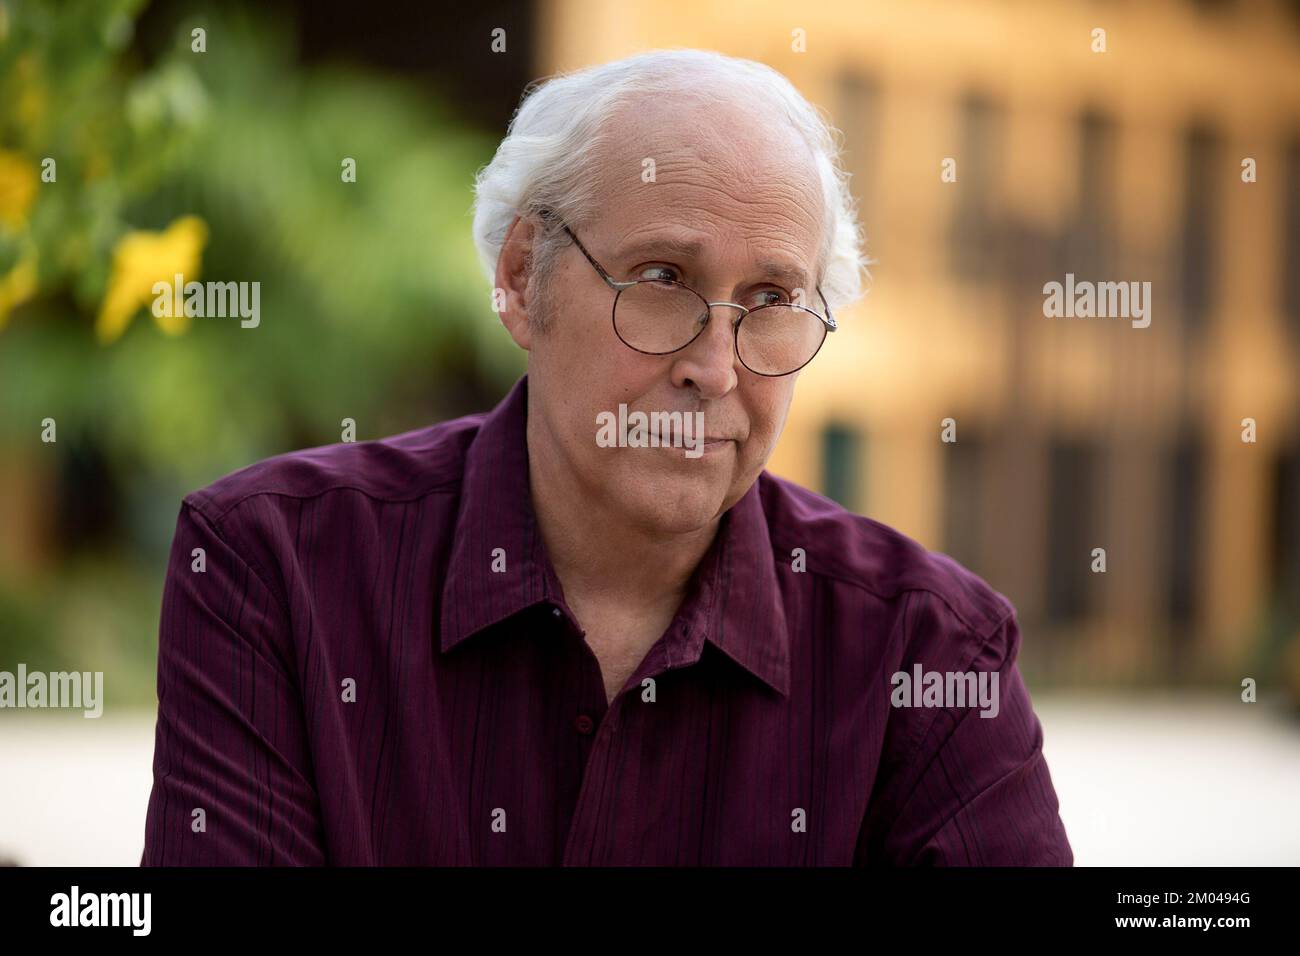 CHEVY CHASE in THE LAST LAUGH (2019), directed by GREG PRITIKIN. Credit: Netflix / Paris Film / Album Stock Photo